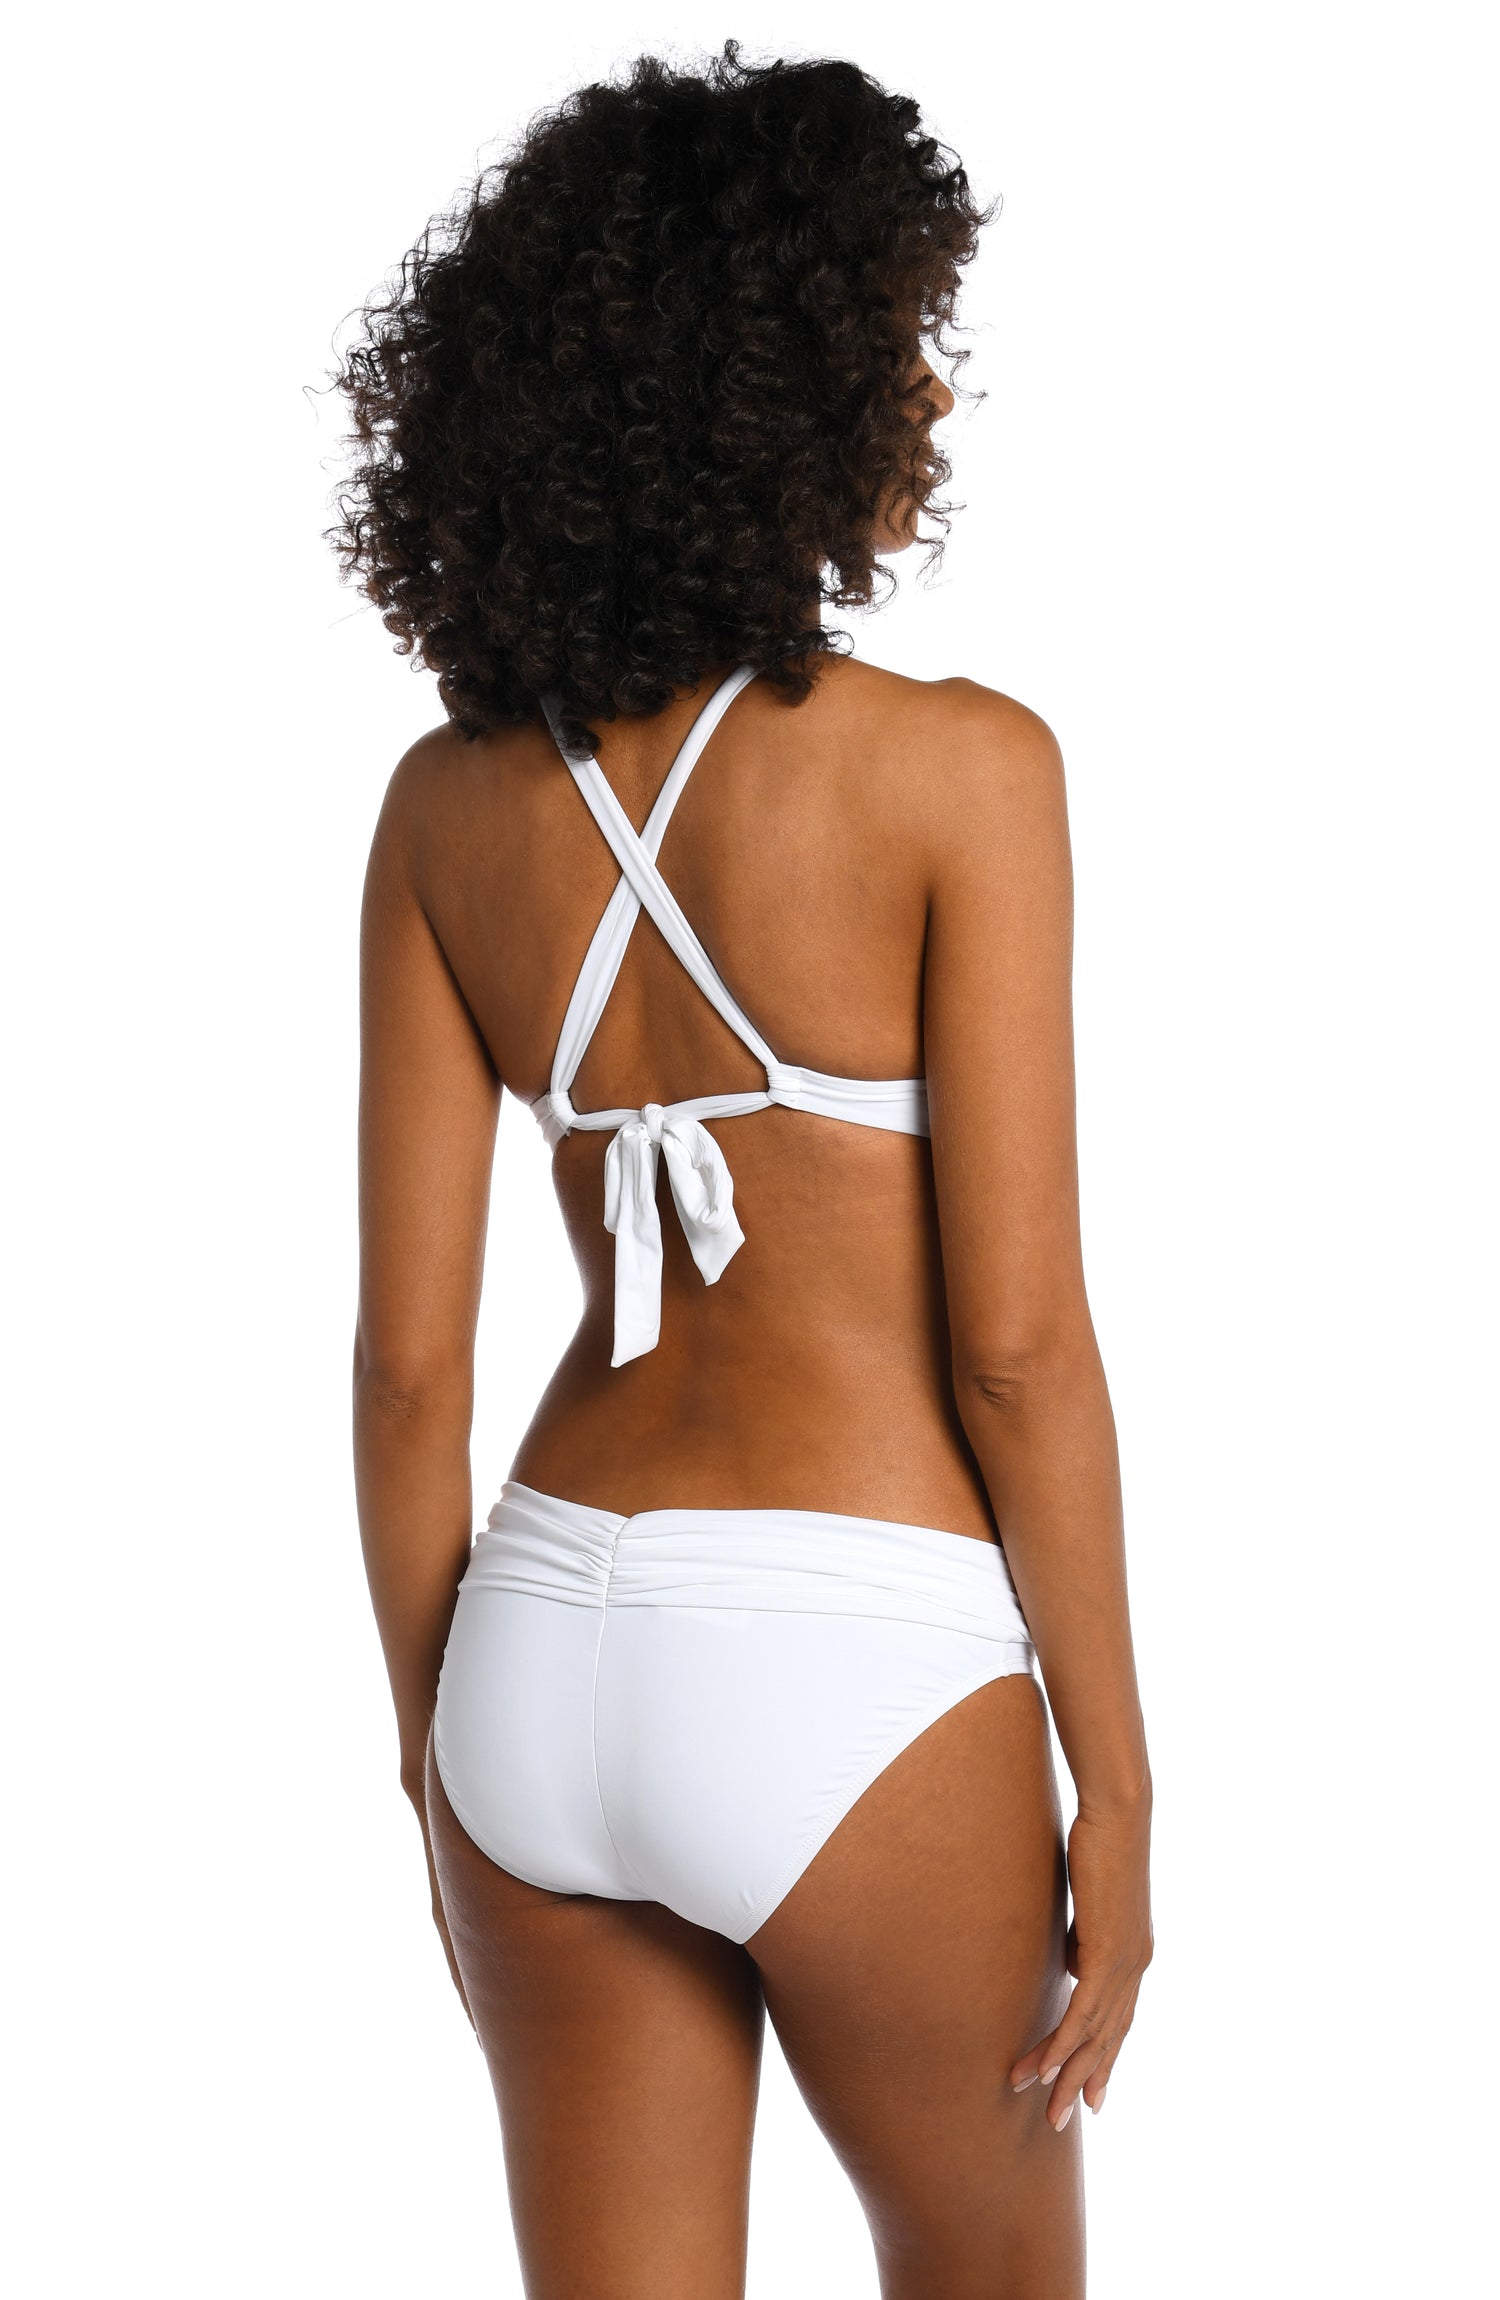 Model is wearing a white twist front swimsuit top from our Best-Selling Island Goddess collection.